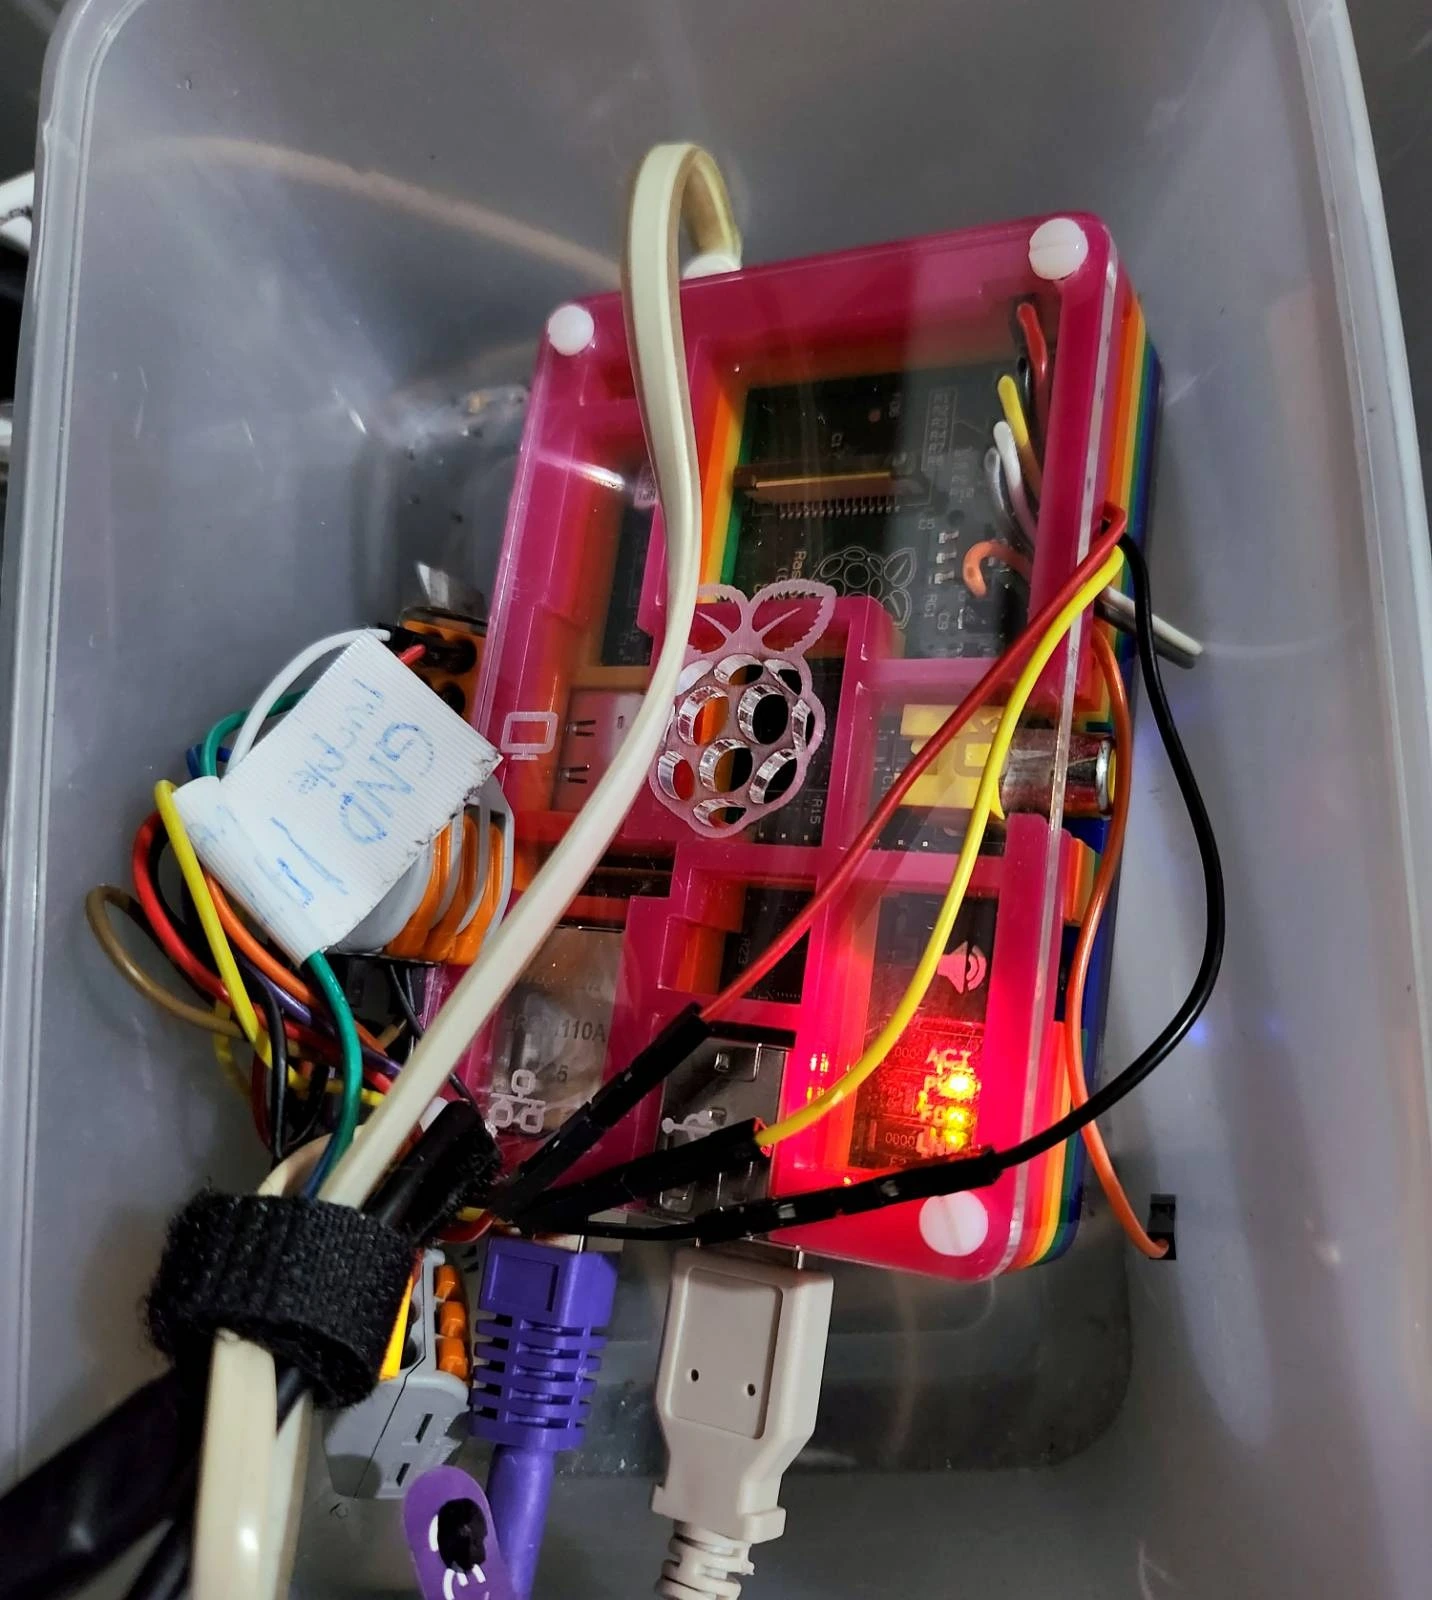 I have a small repurposed plastic box to contain the Raspi and its wiring